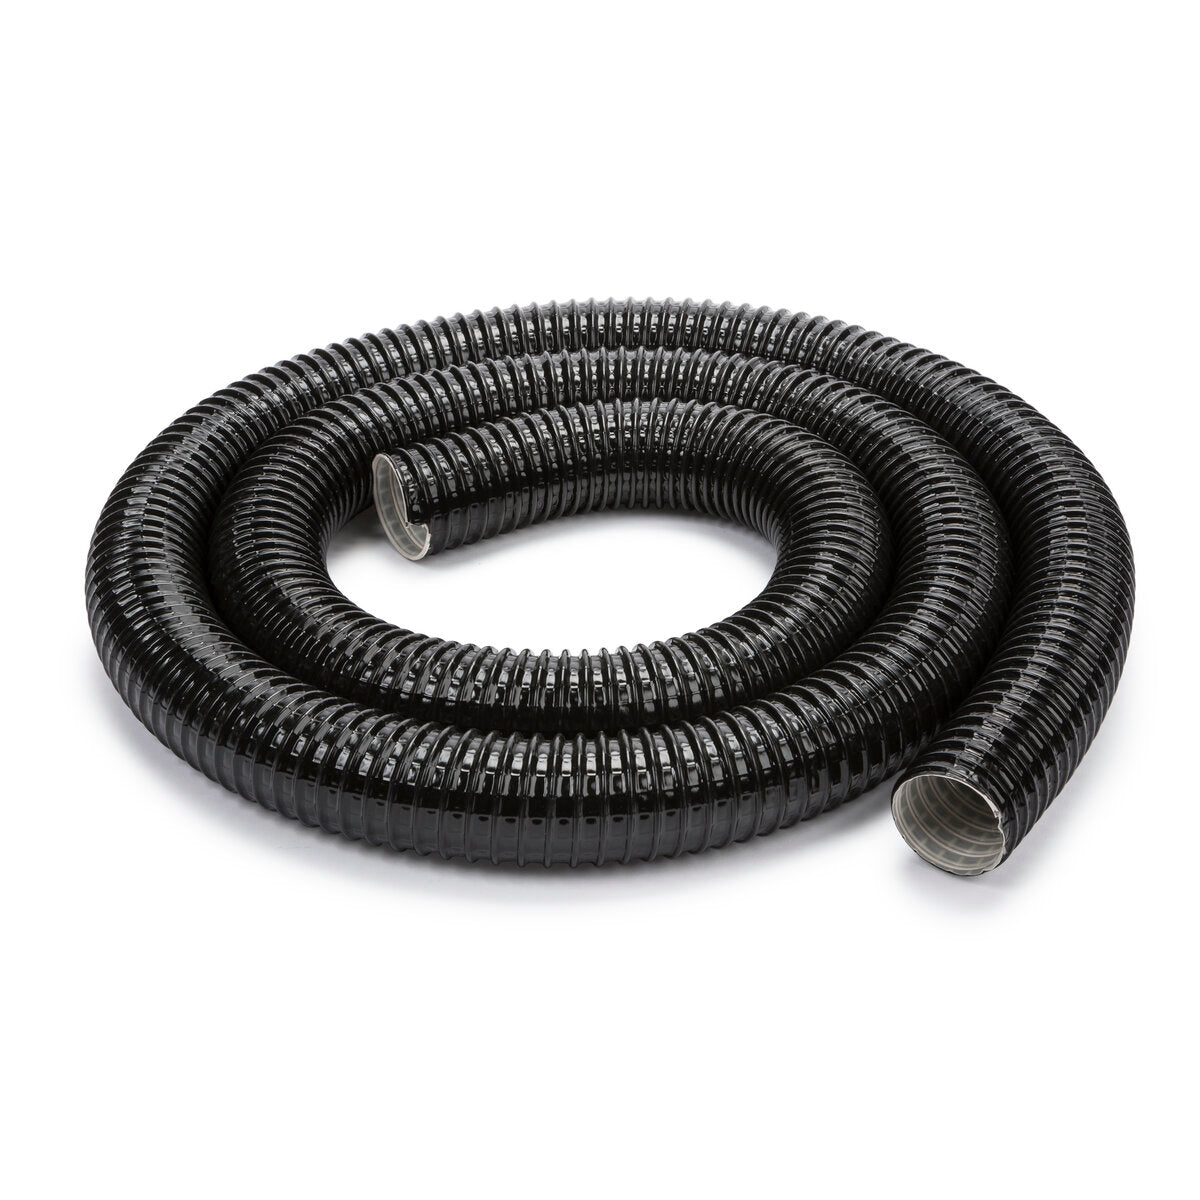 Lincoln Electric - Extraction Hose, 1-3/4 in. (45mm) Diameter (ID) x 25 ft. (7.6m) Length - K4113-25